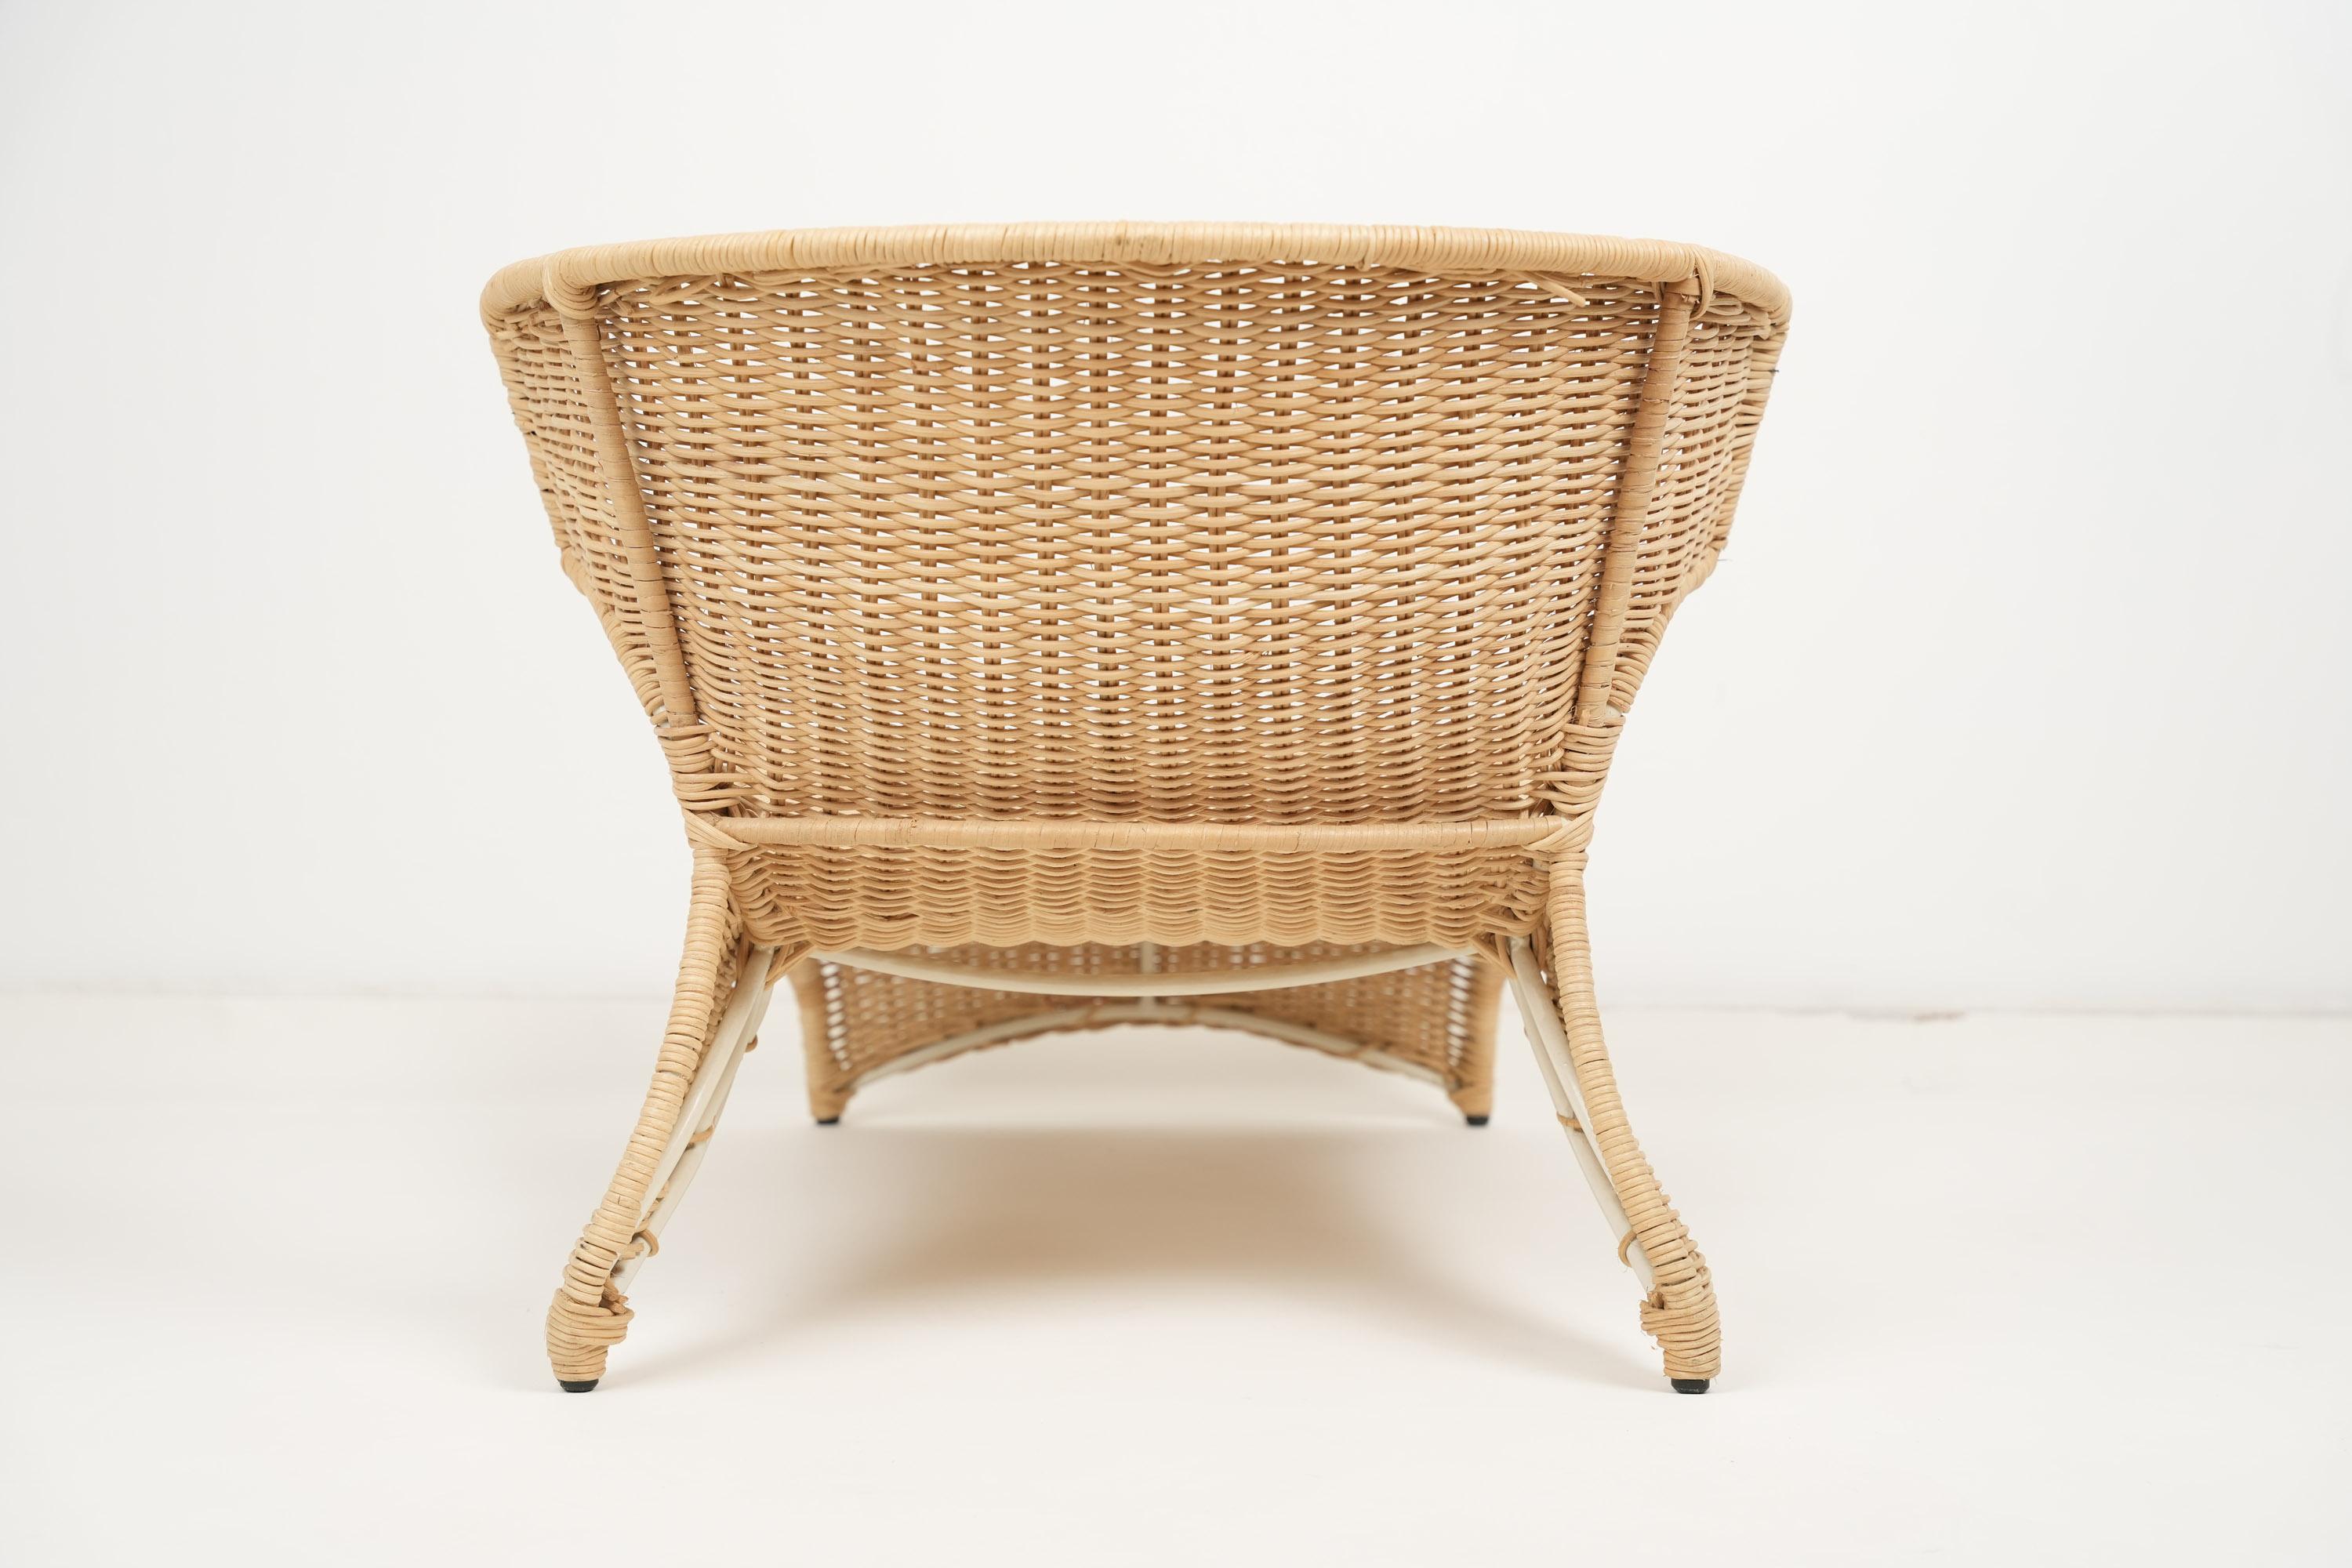 Rattan Low Longue Chair By Monika Mudler for IKEA 1980s For Sale